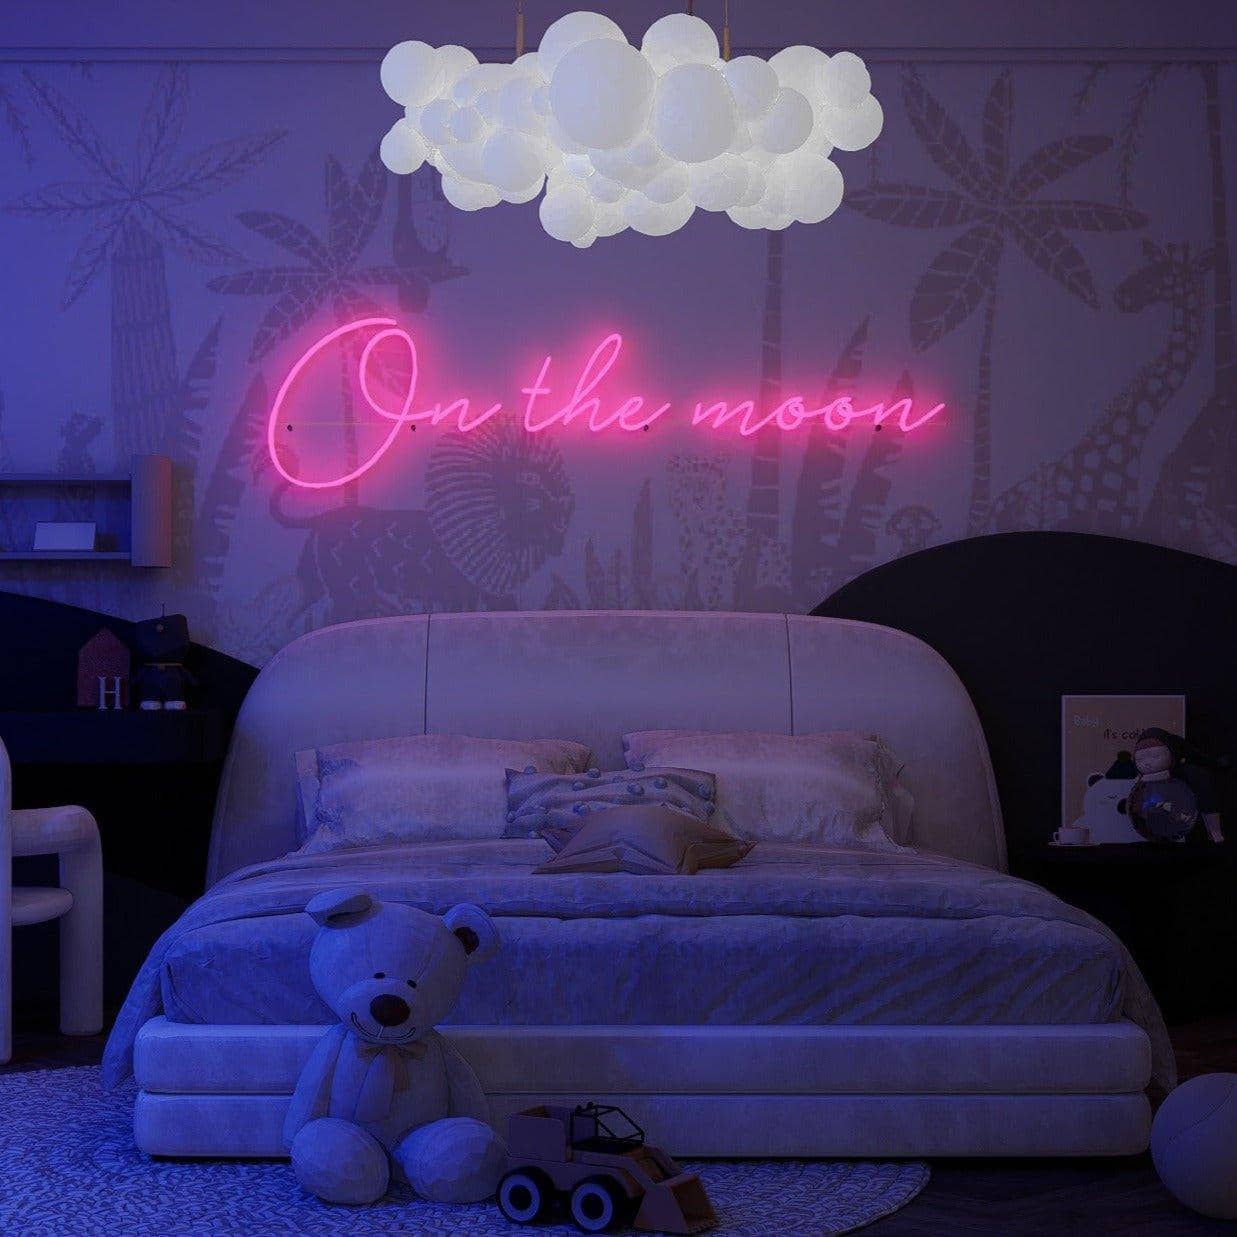 night-shot-of-lit-pink-neon-lights-hanging-on-display-in-bedroom-on-the-moon